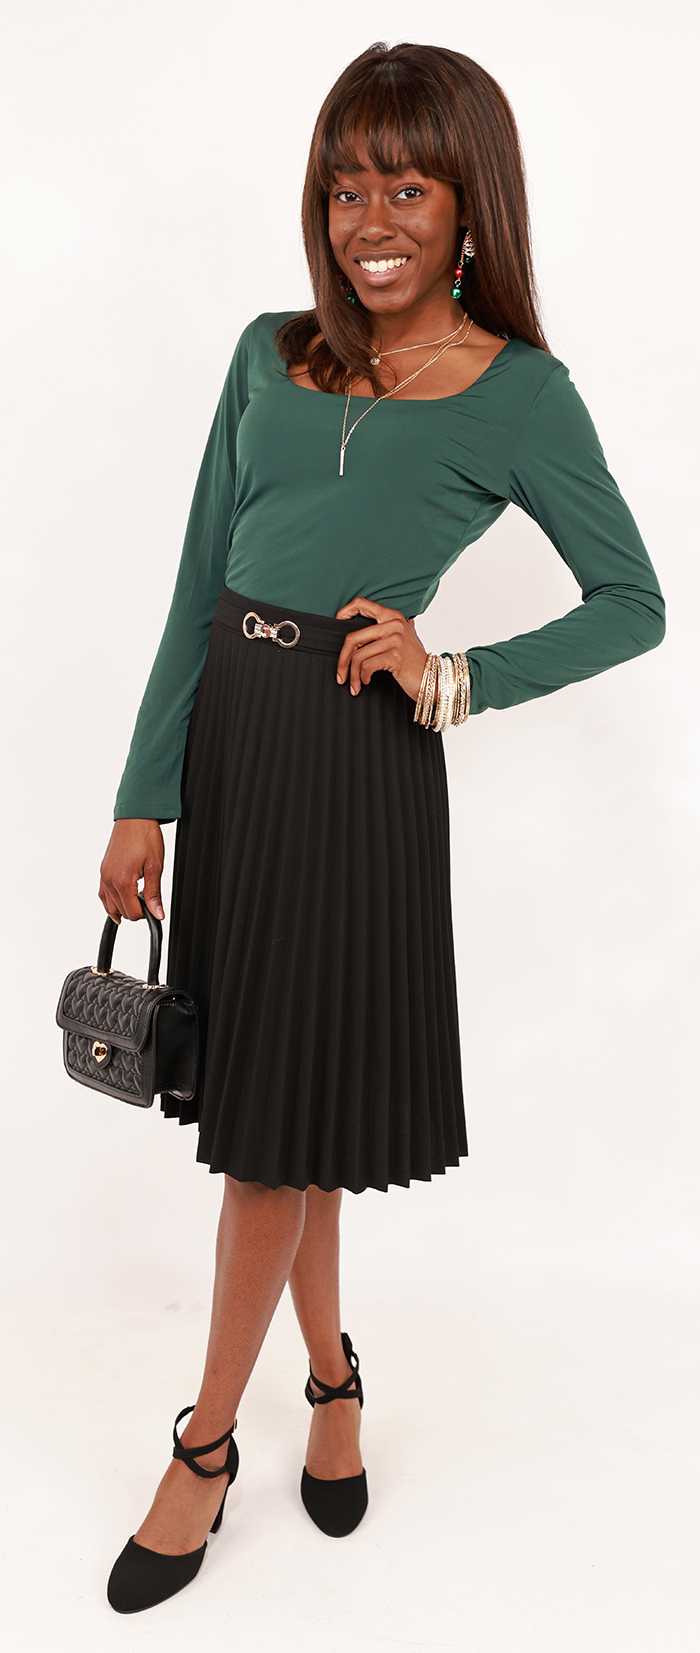 The female contemporary model wears the kelly green "New Mode" 3/4" Long Sleeve Square Neck Top, black "Mango" 23" Gold Embellished Skirt, and black "Top Guy" 3" Thick Closed Toe Ankle Strap Pumps. 